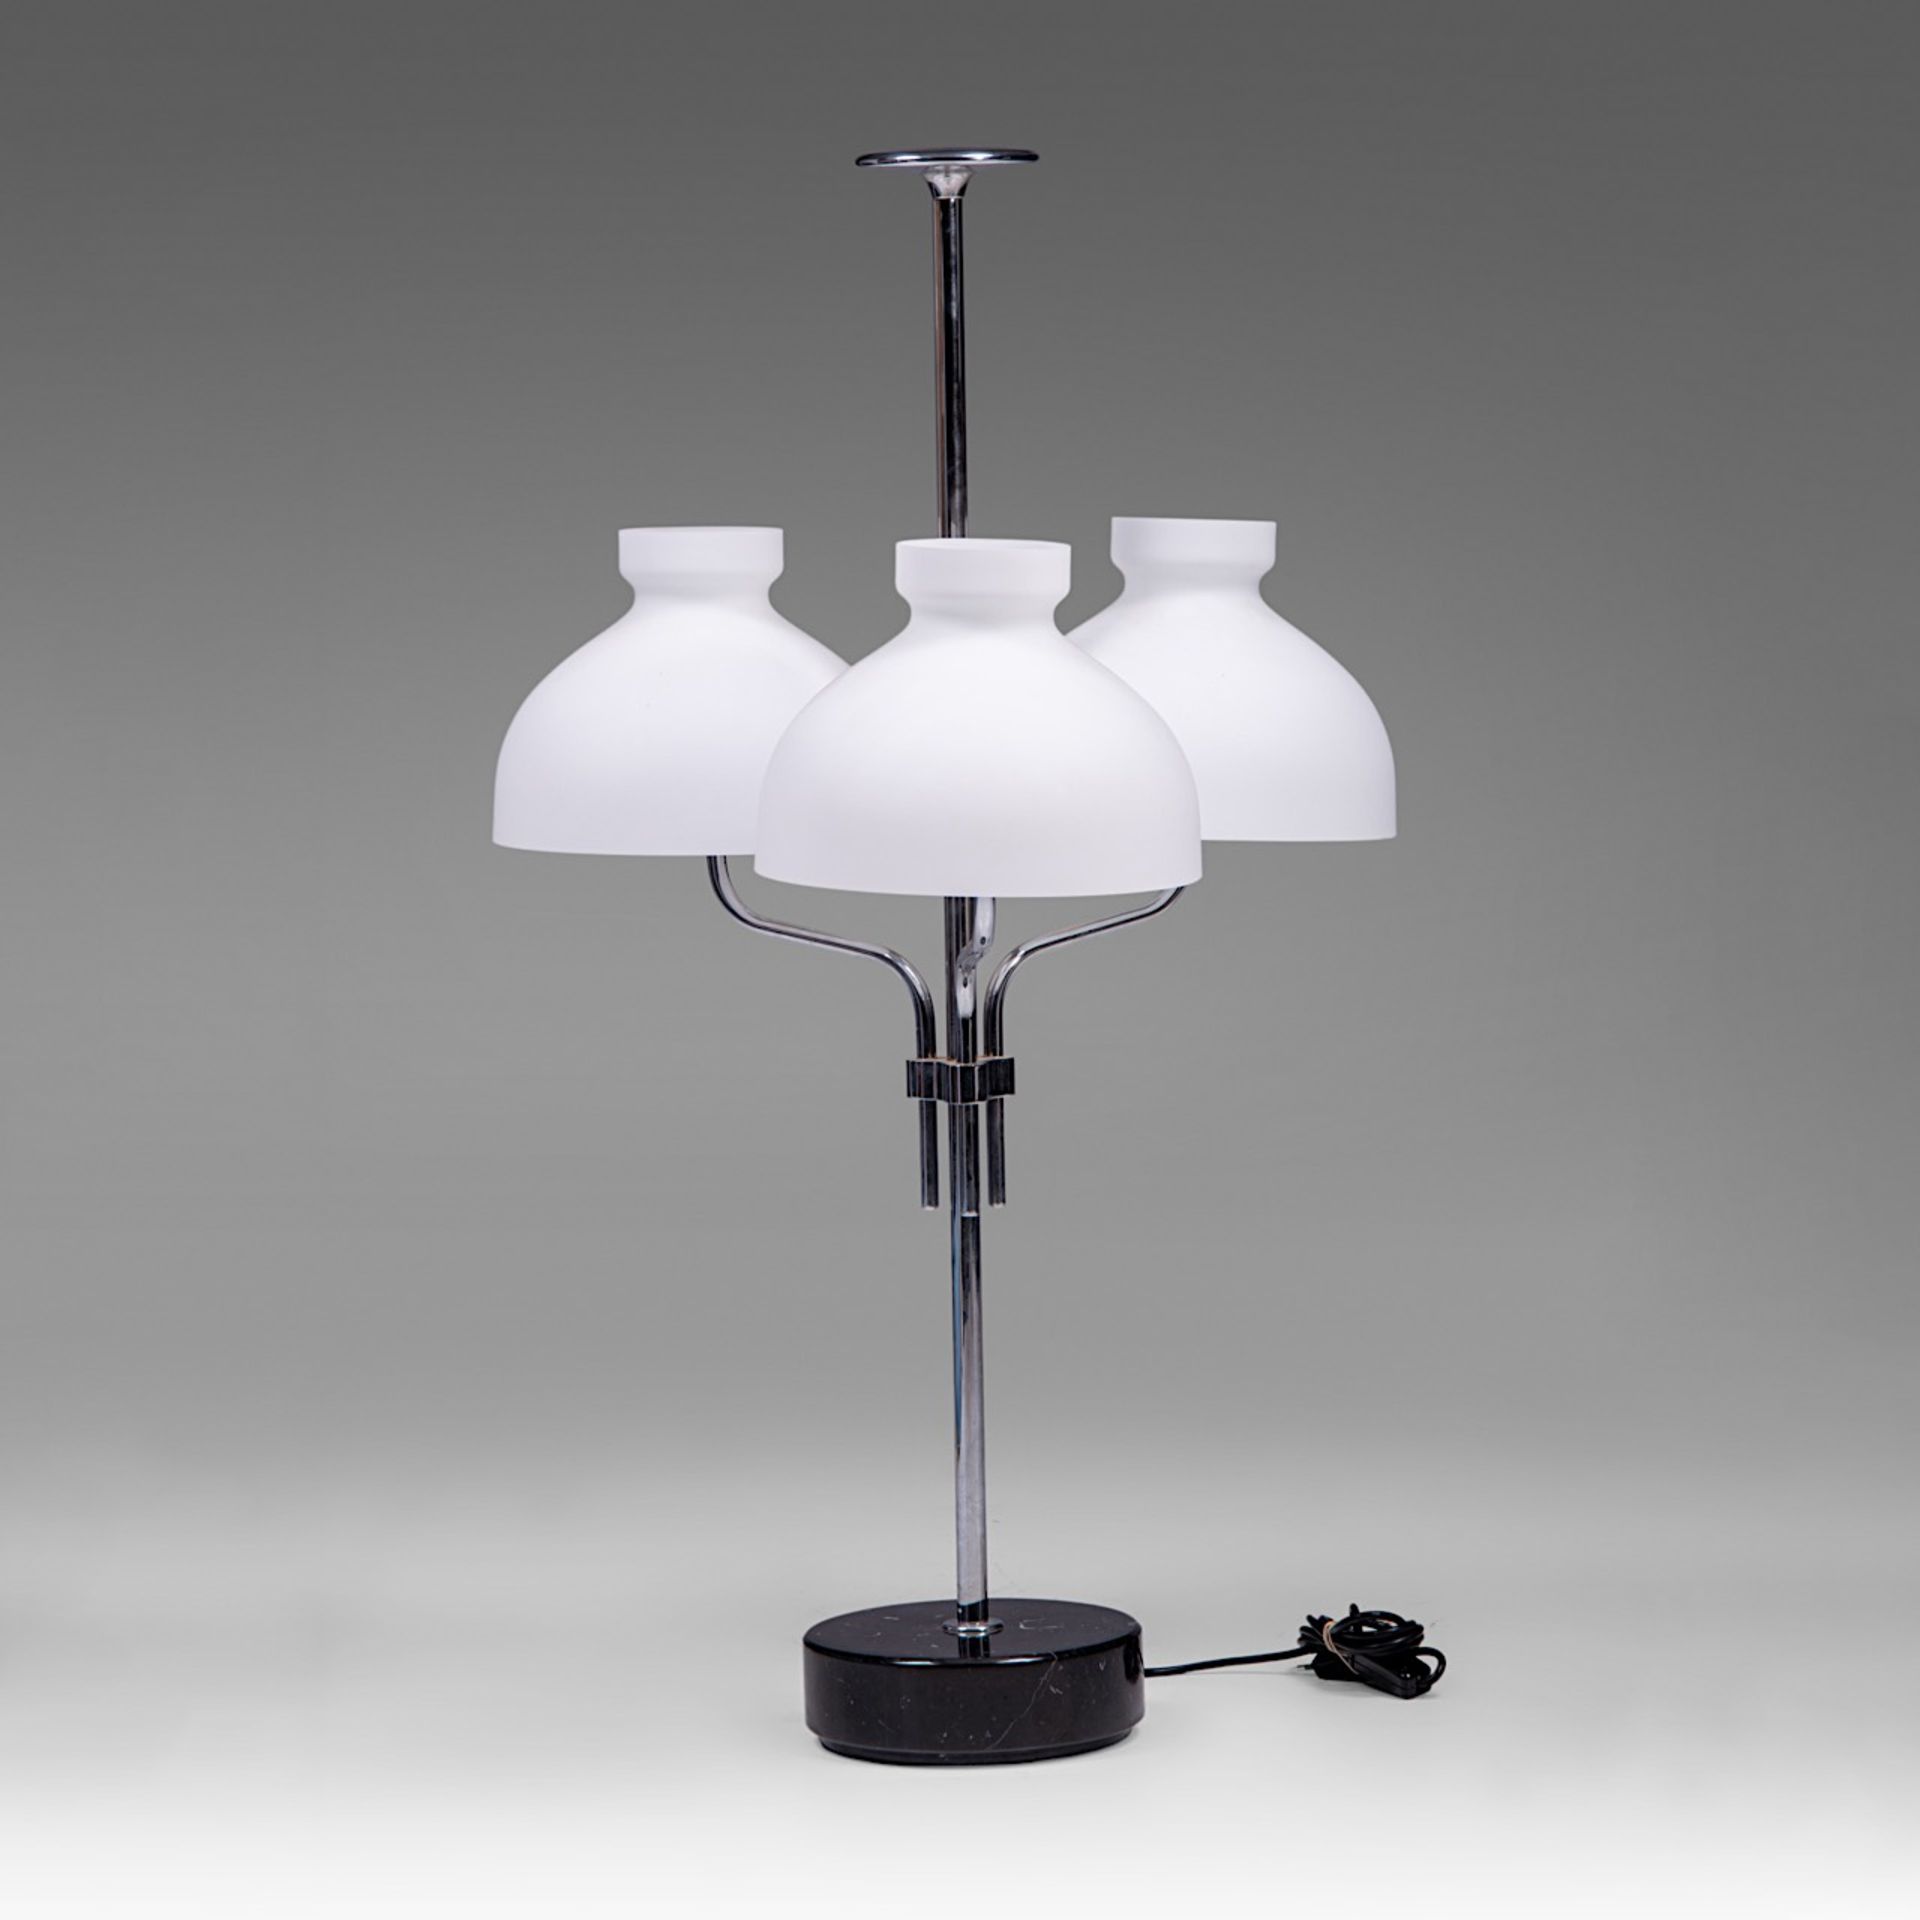 A chrome and opaline glass 3-light table lamp by Ignazio Gardella for Azucena, 2000s - Image 2 of 4